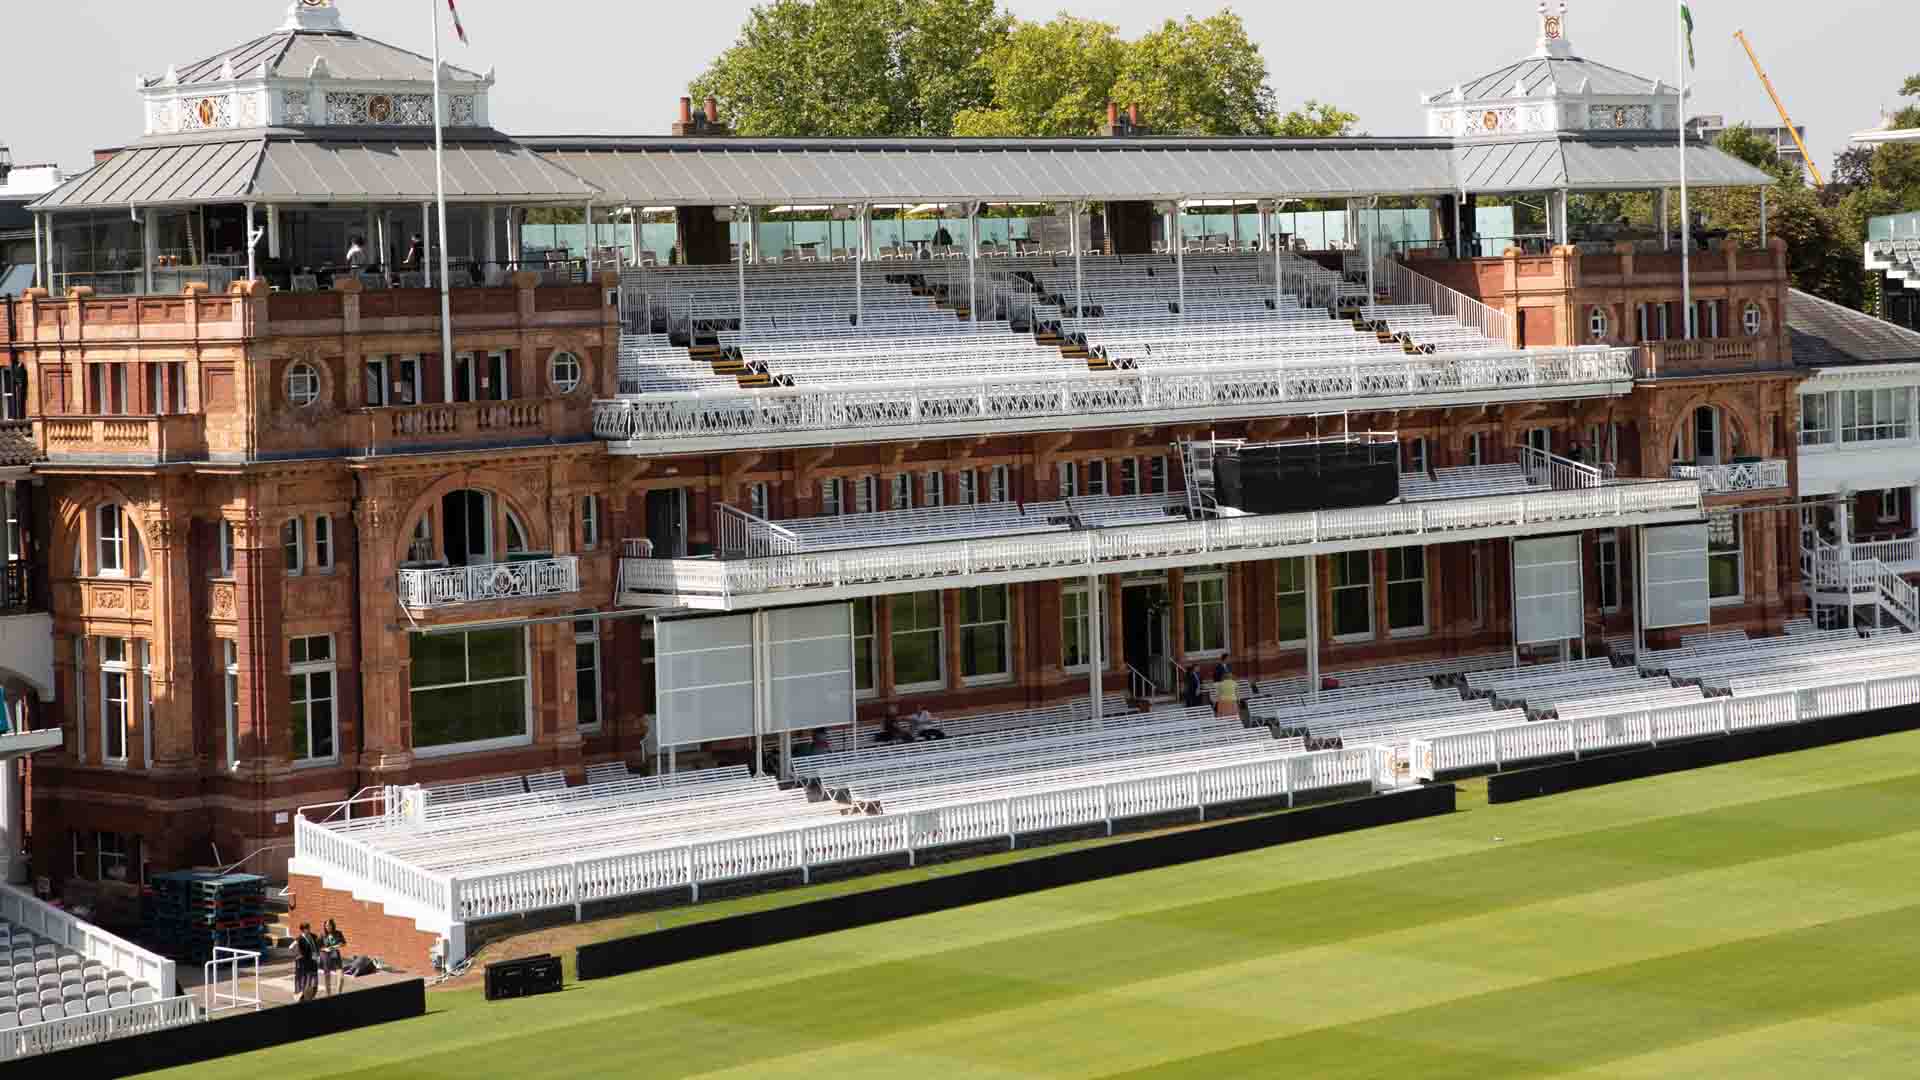 Lord's opens up for NHS and Local Community